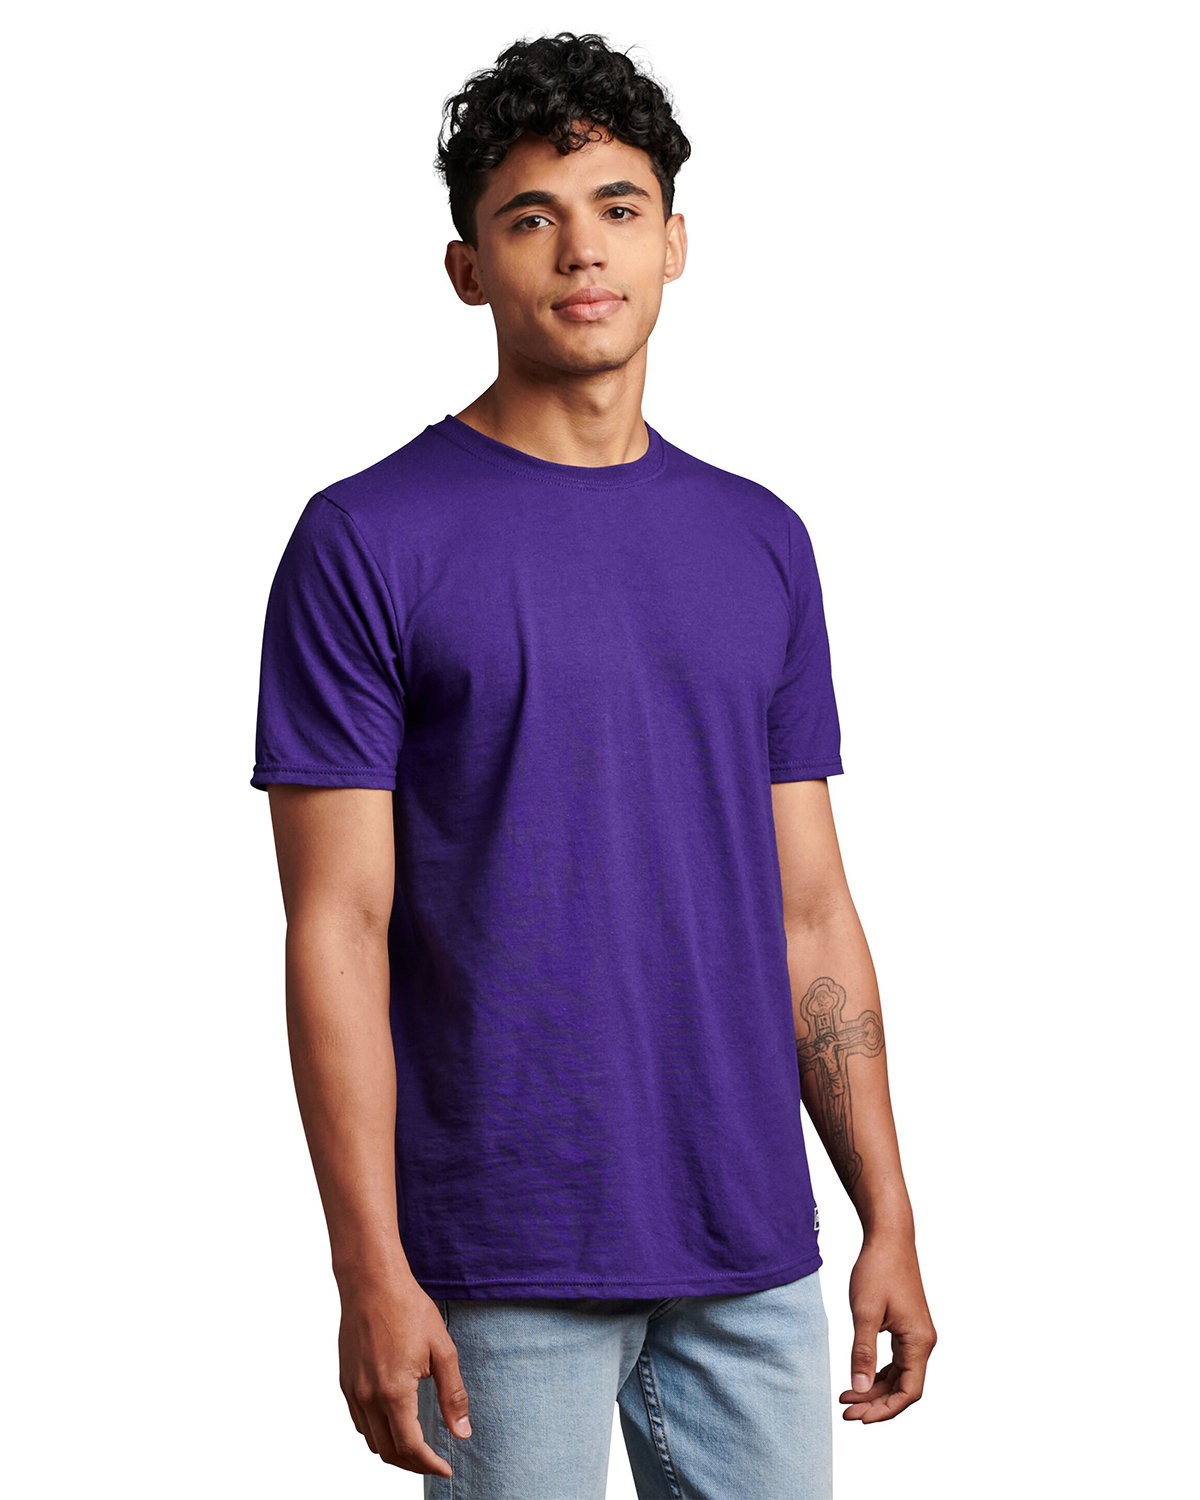 Russell Athletic Unisex Essential Performance T-Shirt PURPLE 